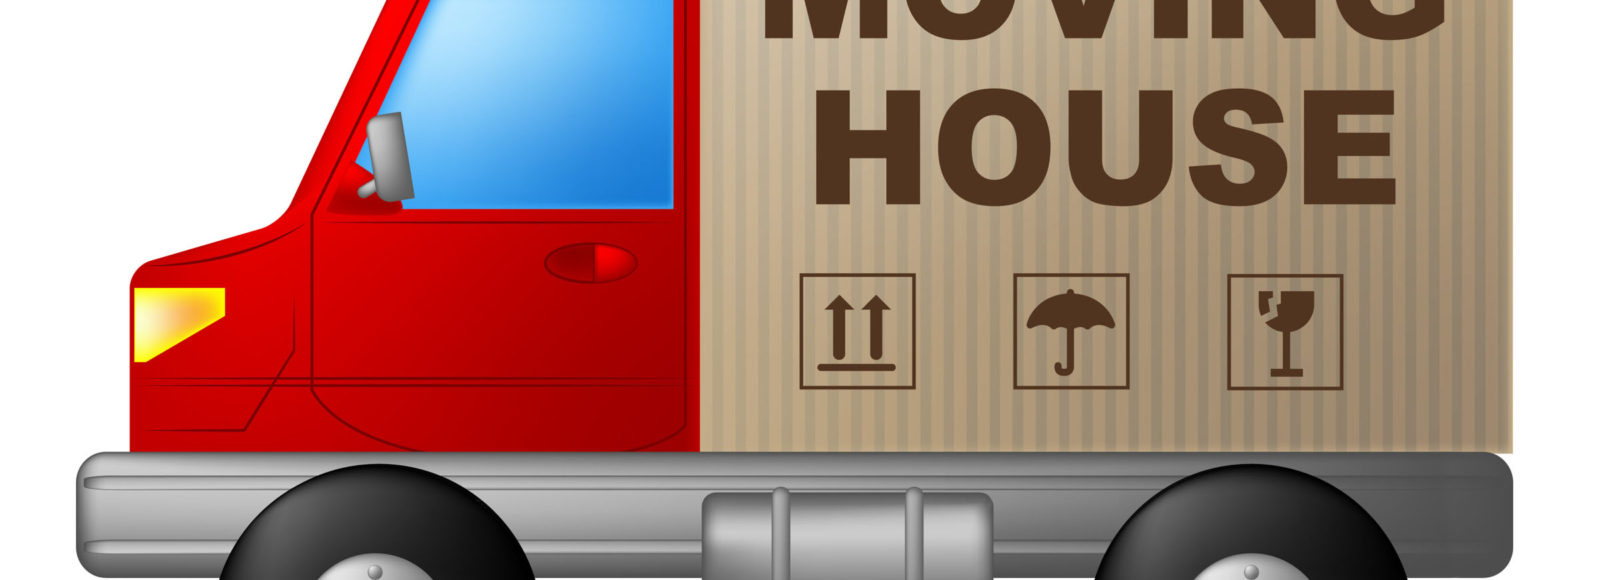 moving van - do your own house removals